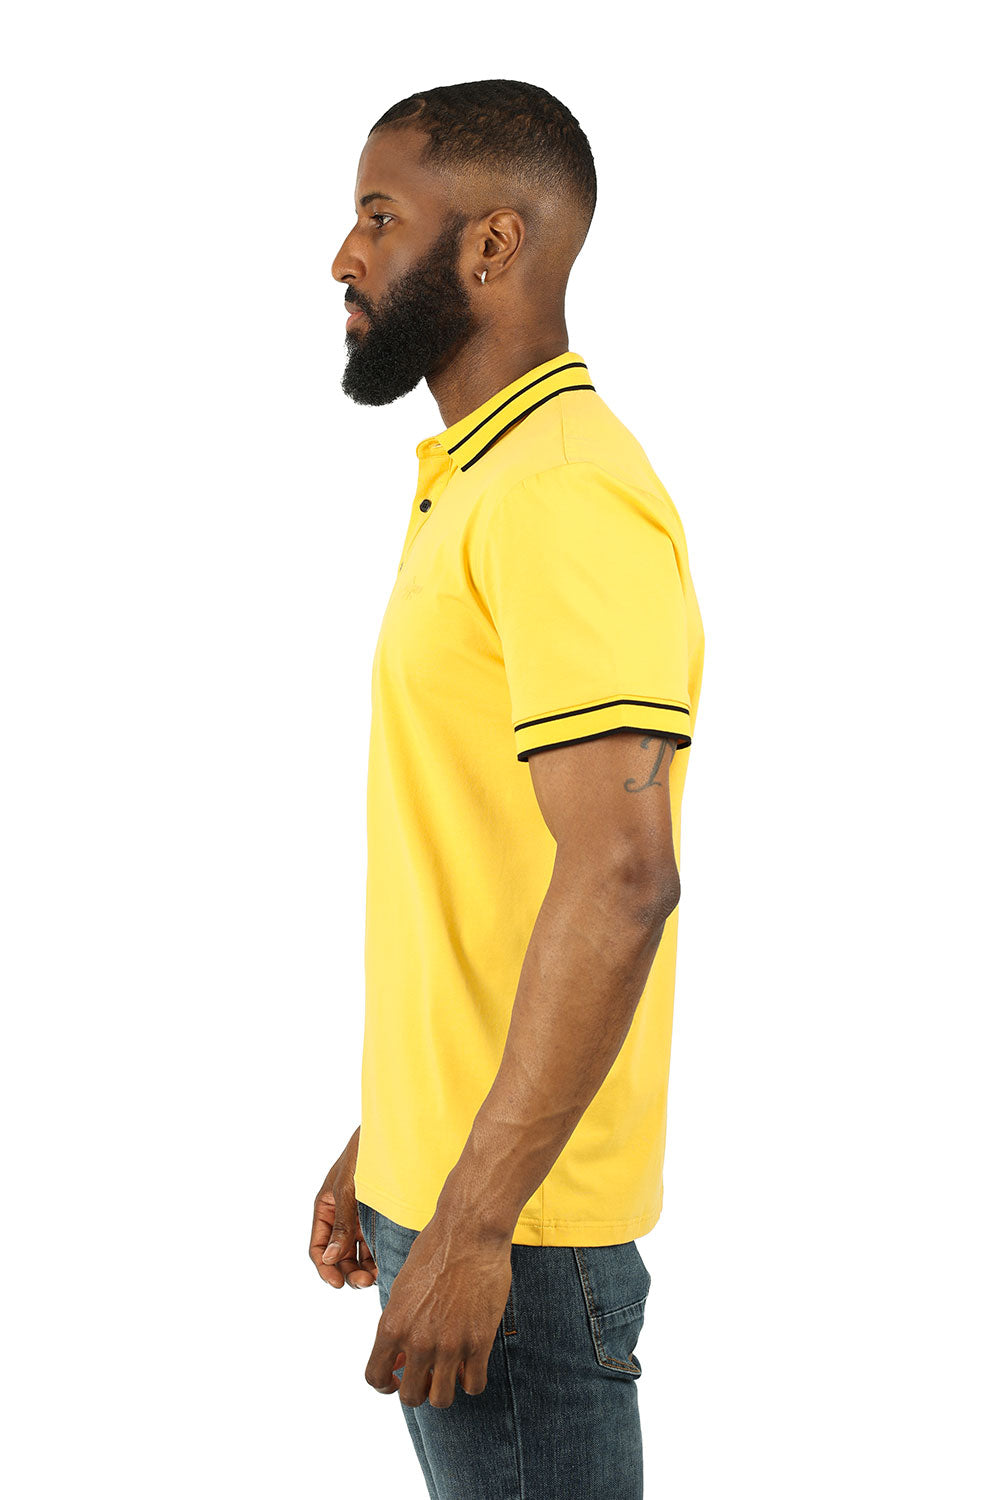 Barabas Men's Solid Color with Logo Polo Shirts 3PP832 Mustard